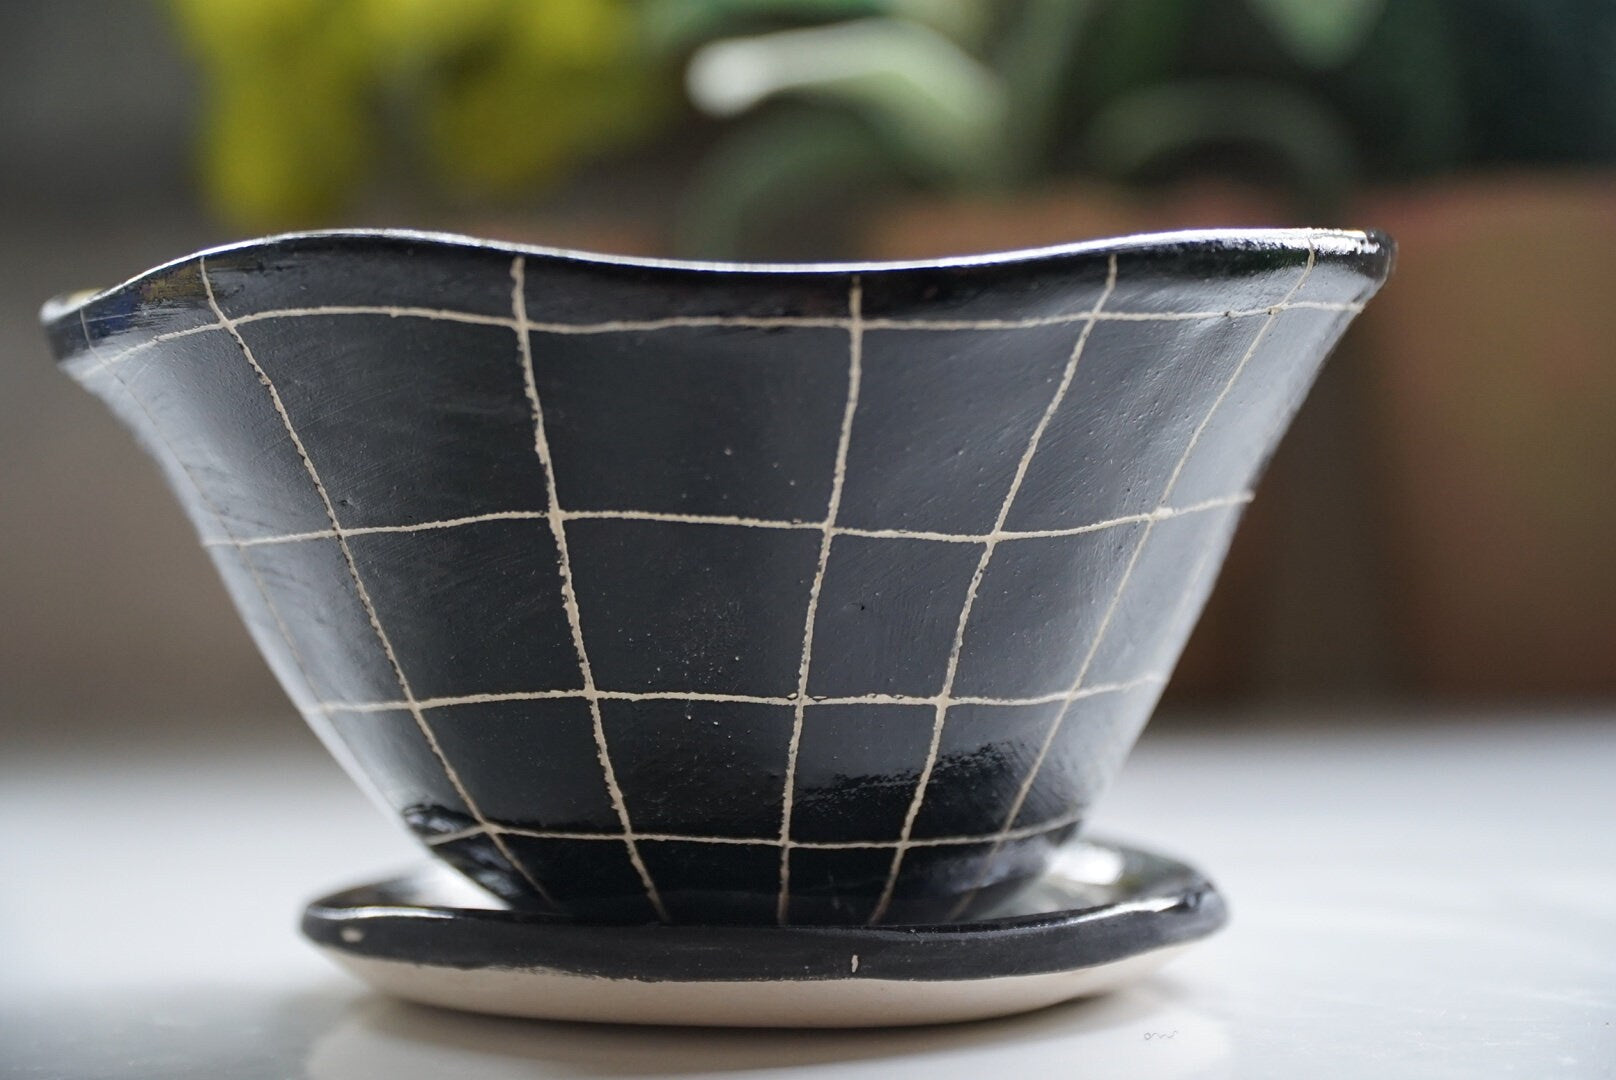 Black and White Glazed Table Planter w/ "Grid" Design - Matching Tray - Succulent Planter - Small Plant Pot - Propagating Planter - Housewarming